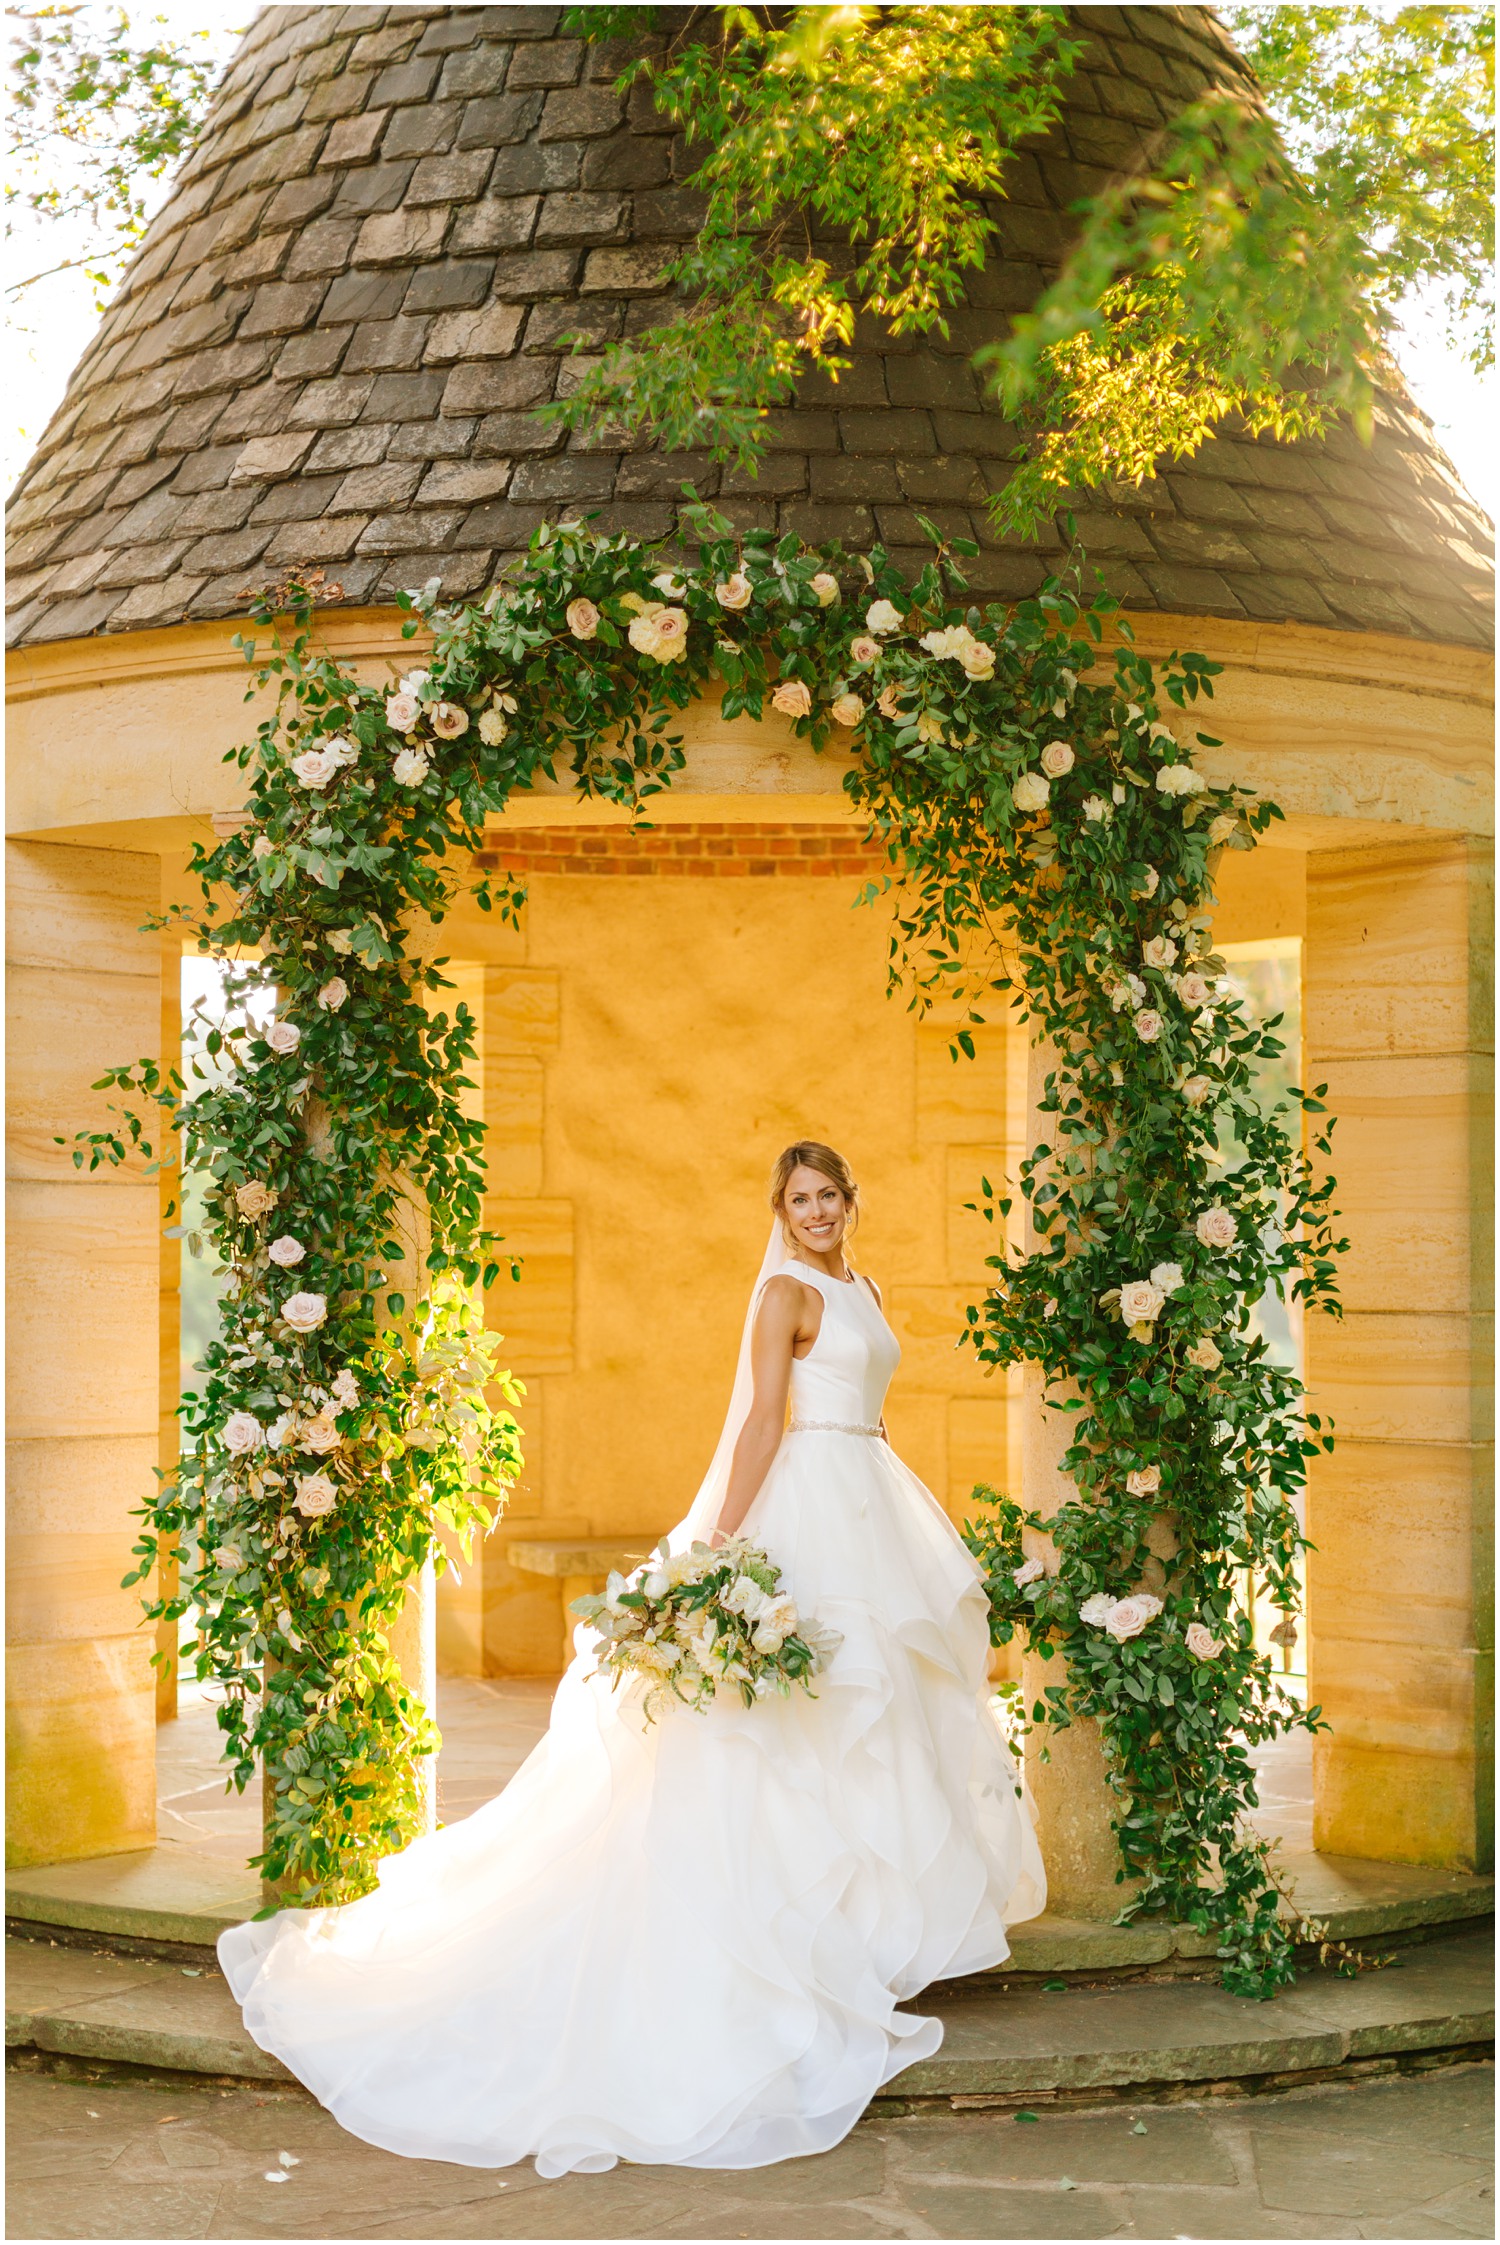 Graylyn Estate bridal portrait under floral archway with green and white flowers